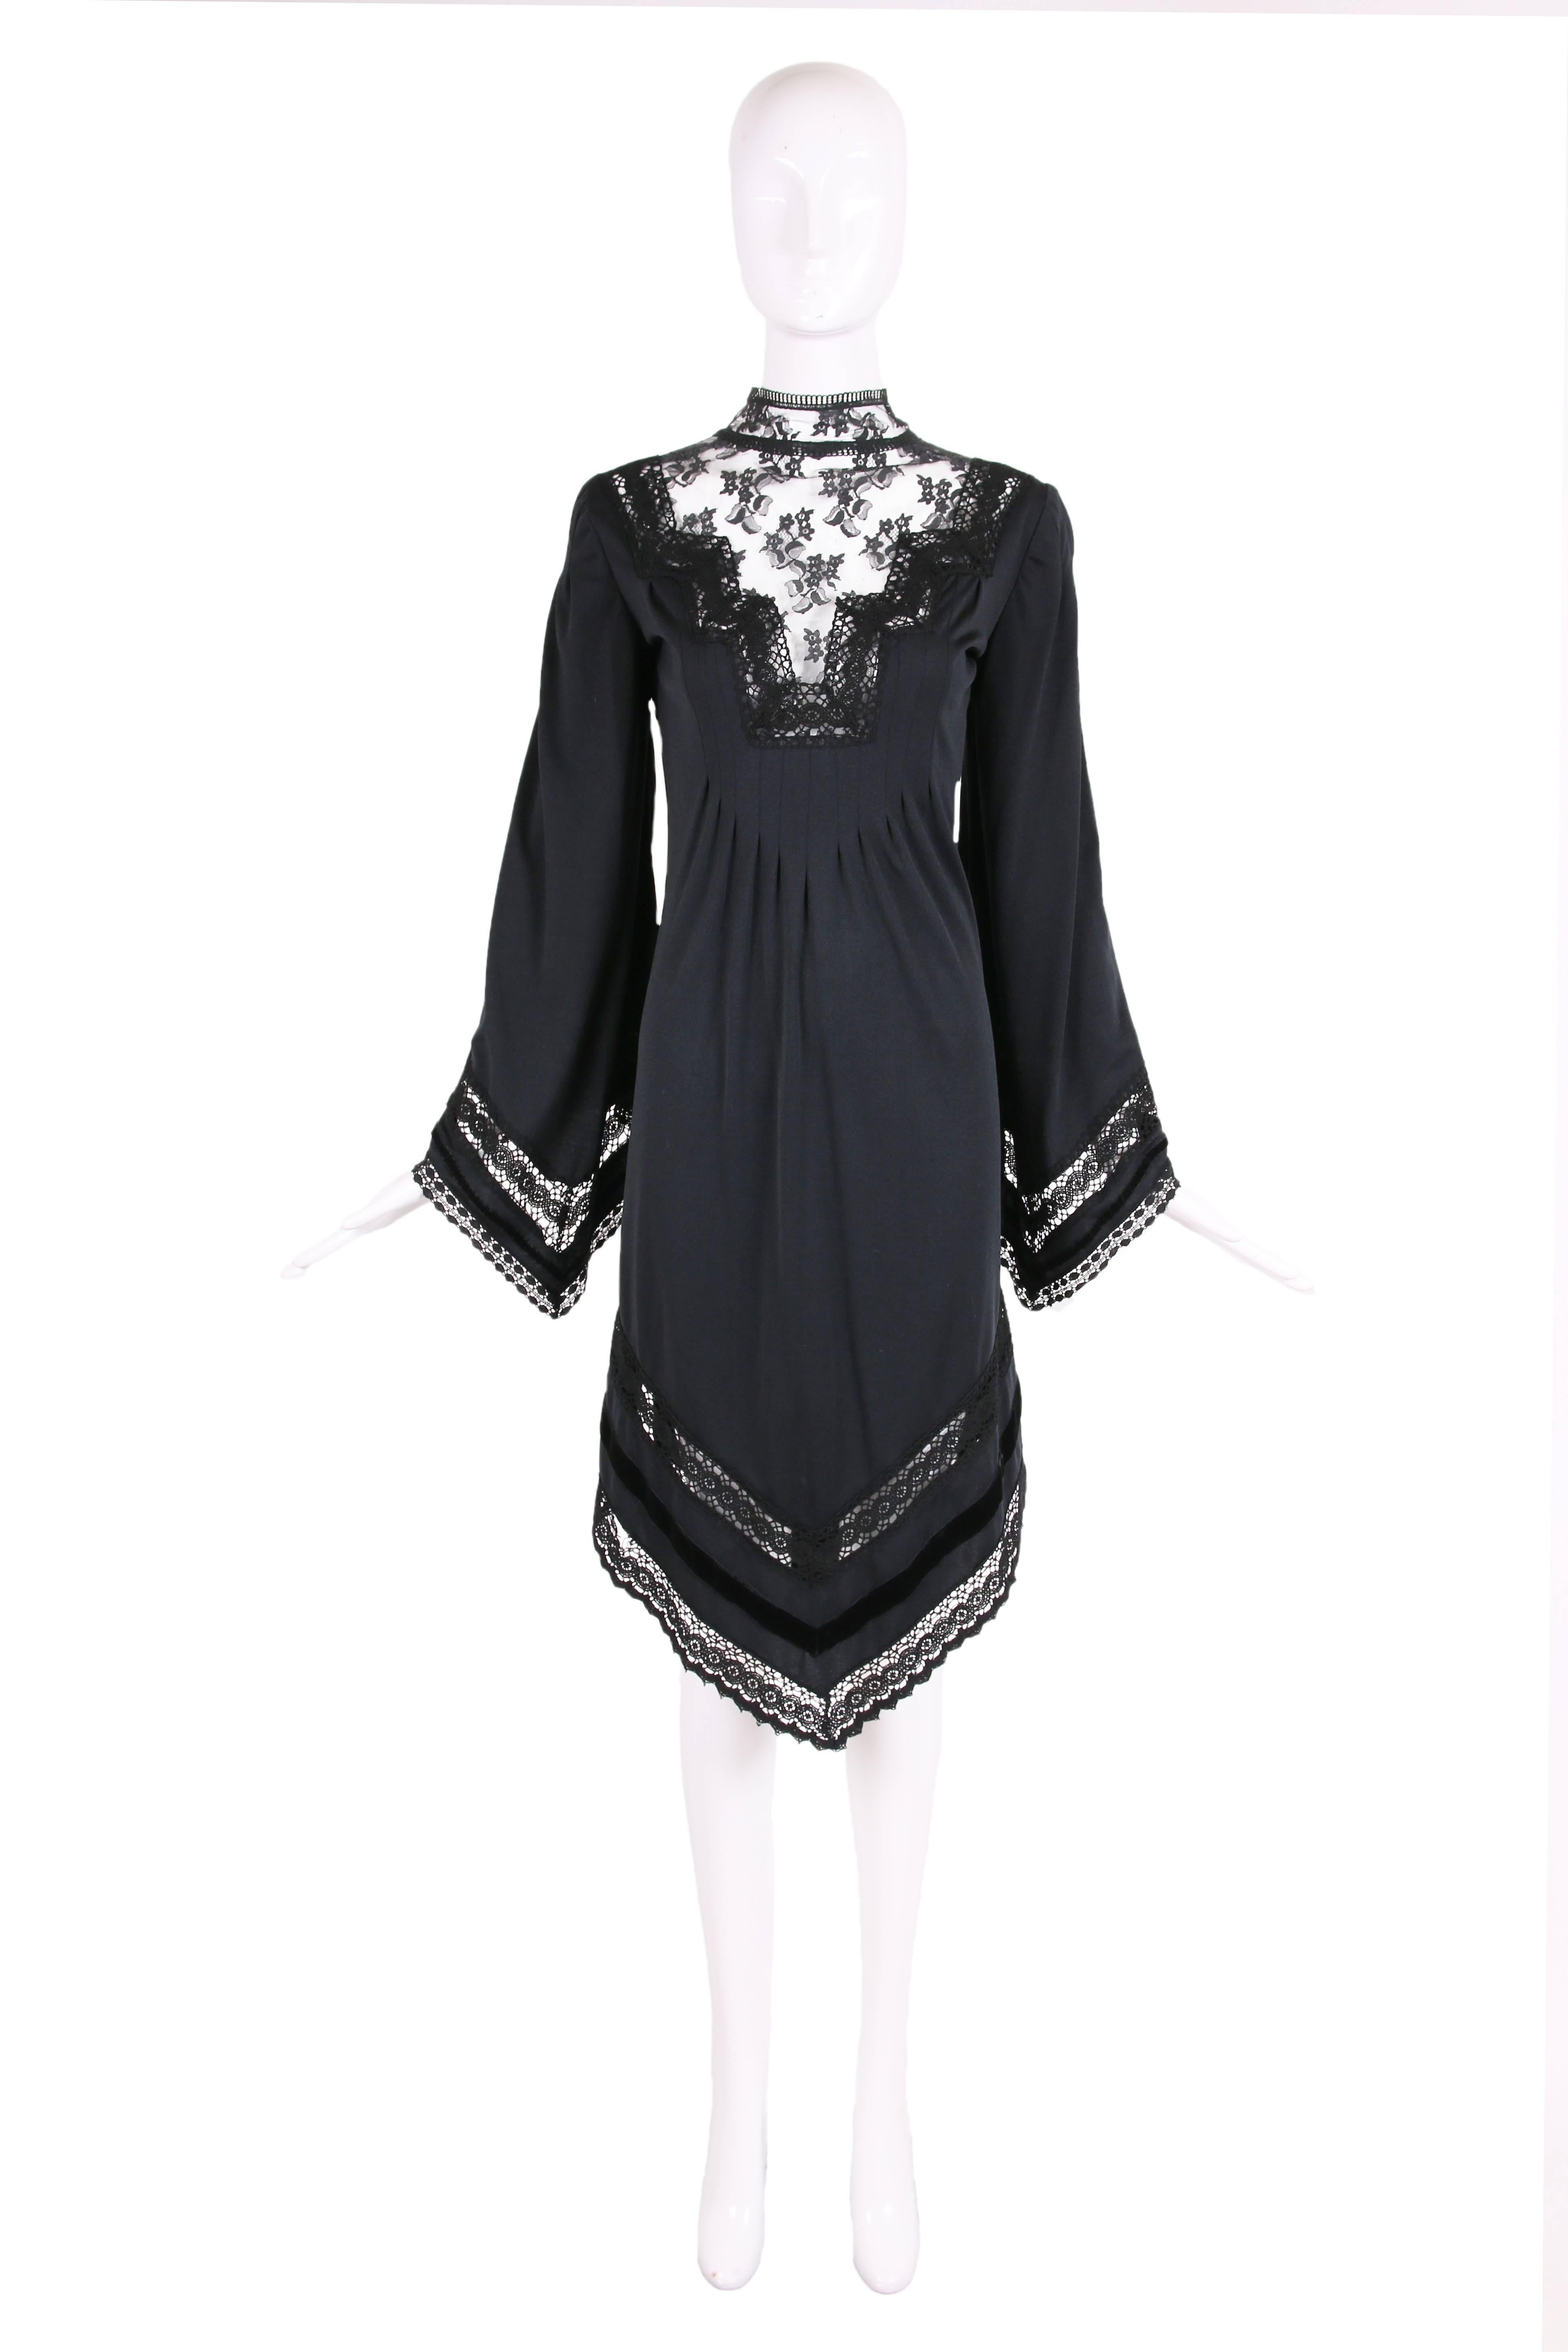 1970's Giorgio di Sant'Angelo black jersey dress with triangular hem at front and back. There is lace and crochet at the neckline and then lace, crochet and velvet trim in bands at the bell sleeves and hemline. In excellent condition with one very